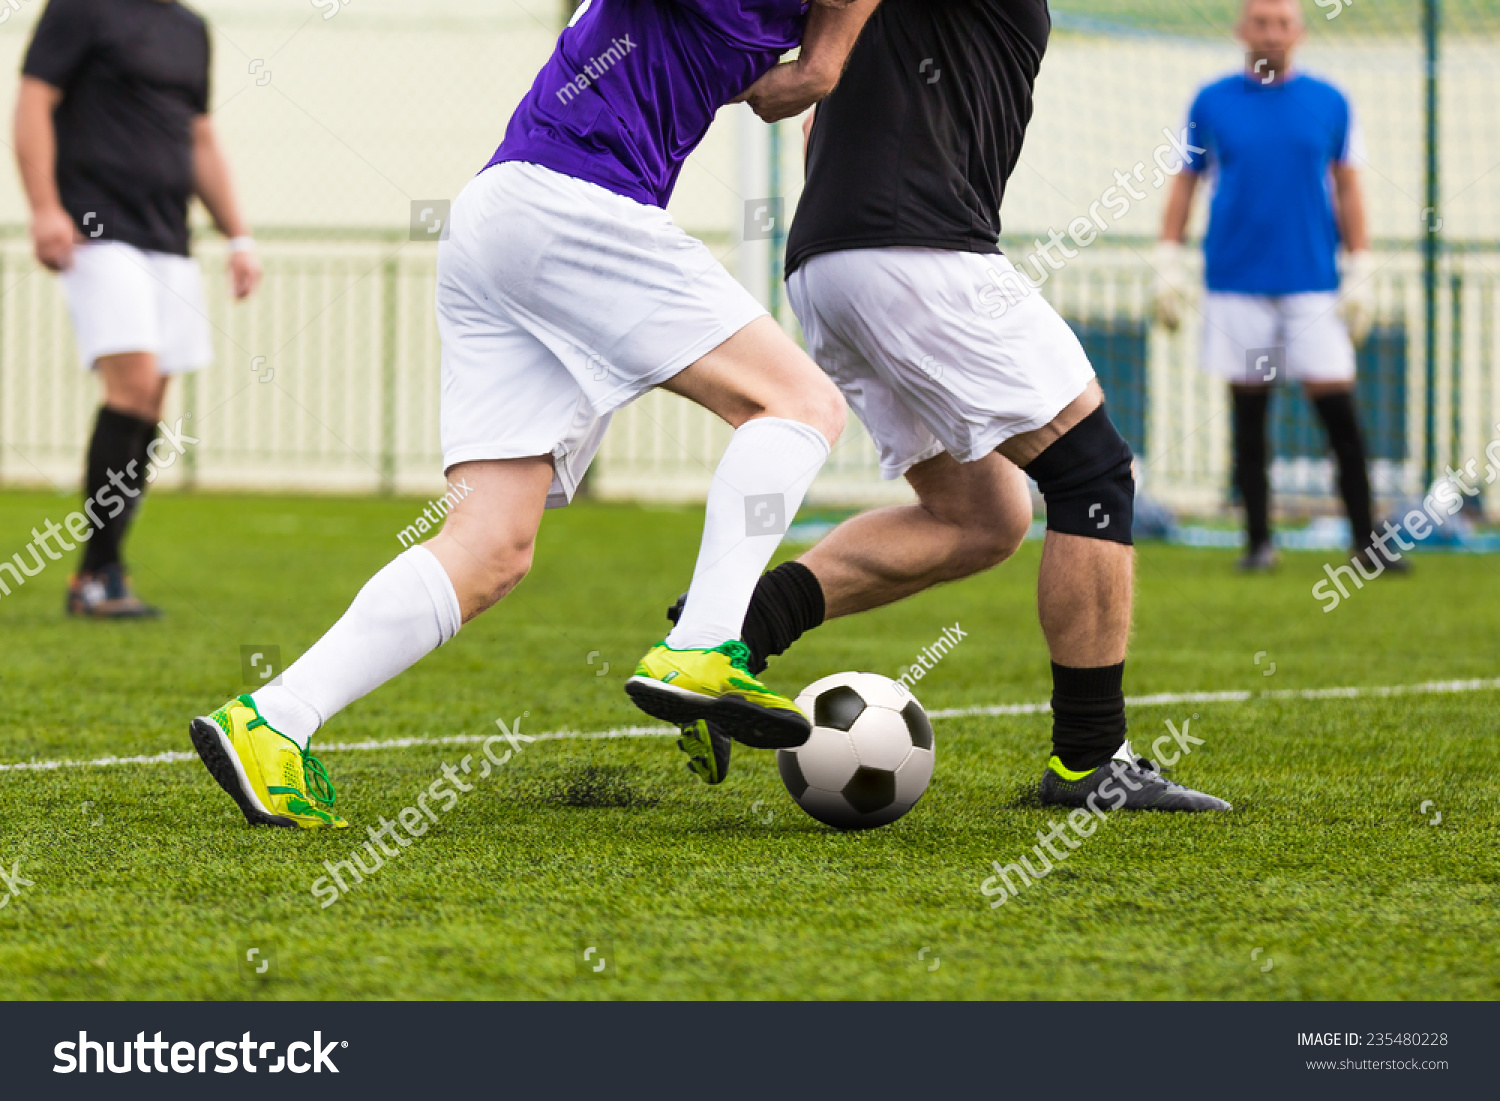 football soccer game. competition between two running players footballers #235480228